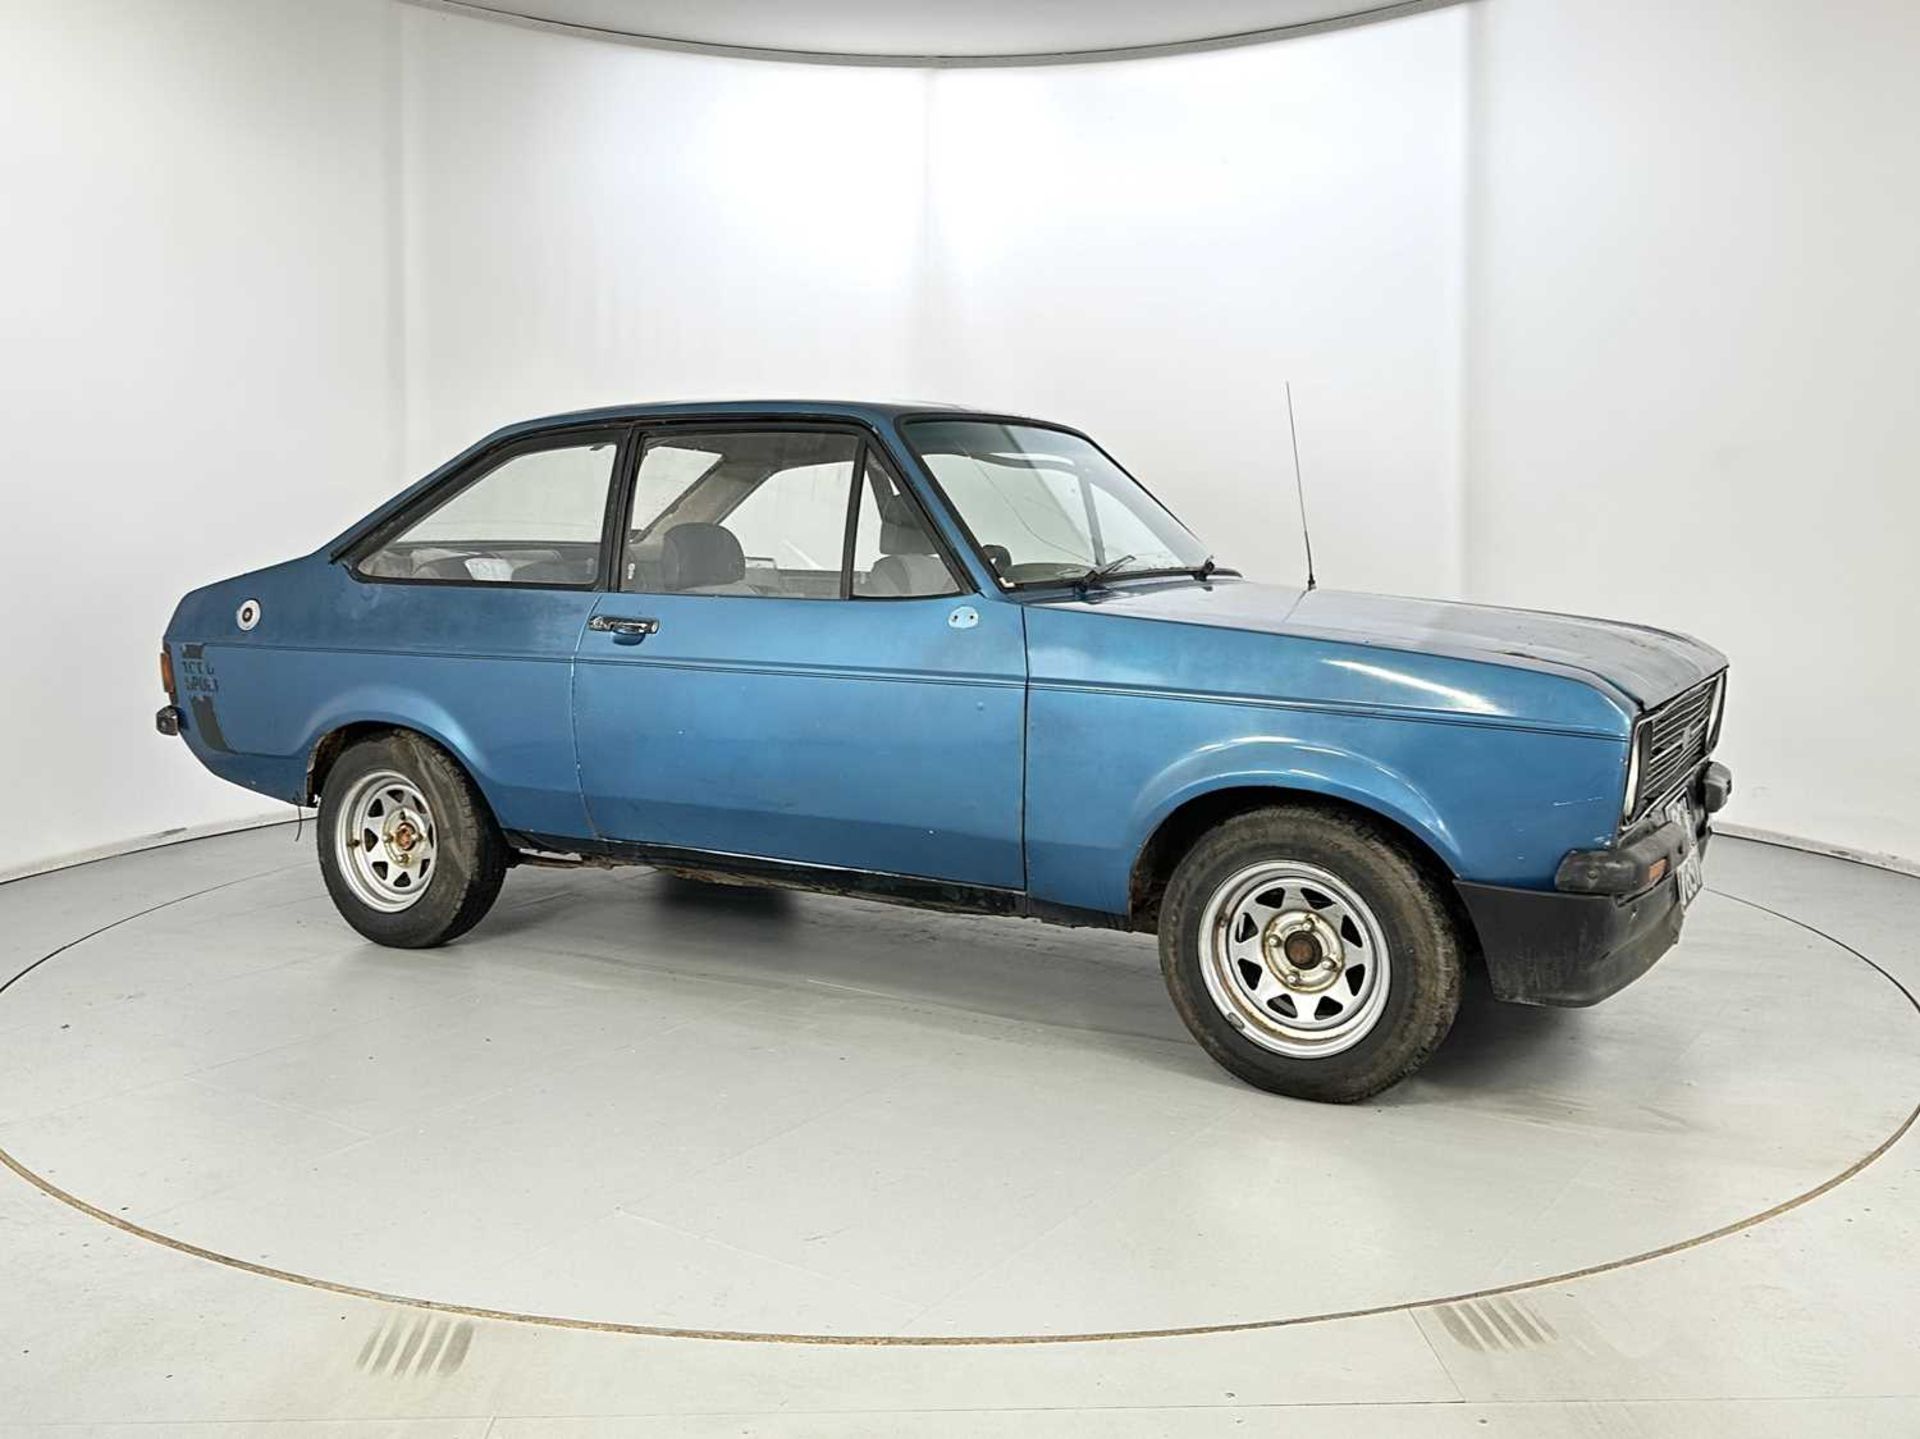 1979 Ford Escort 1600 Sport - Image 12 of 22